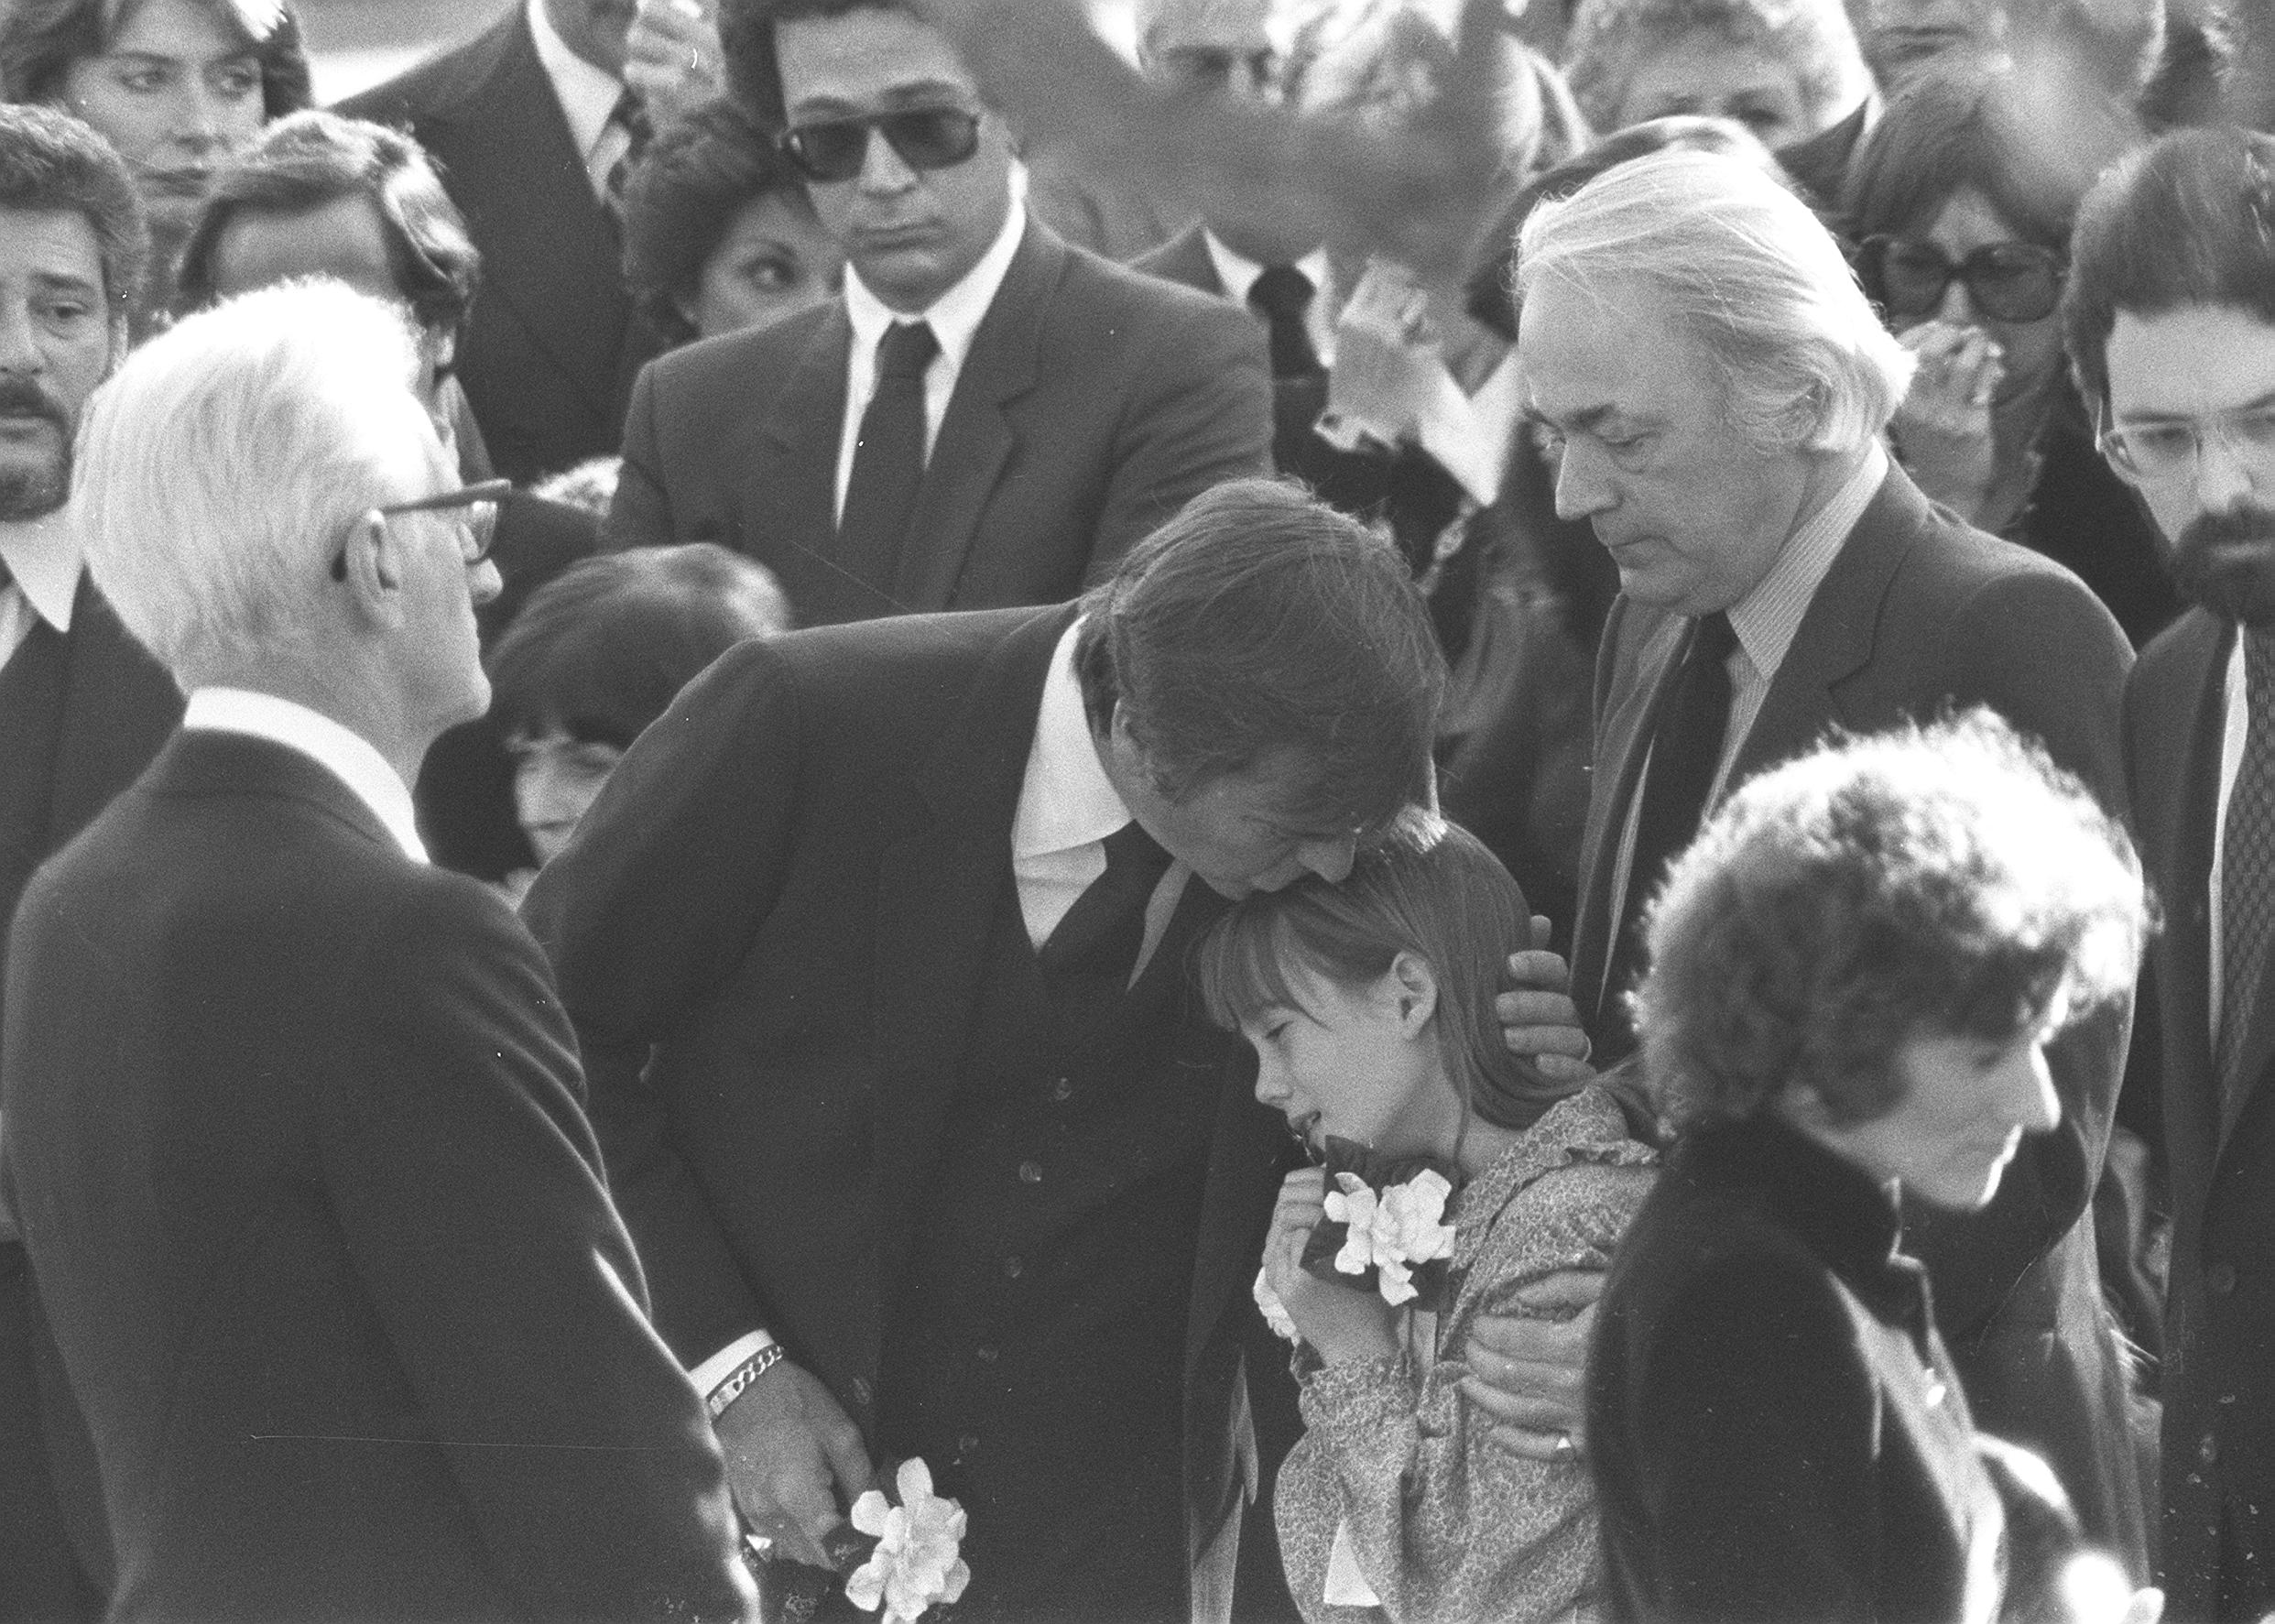 Robert Wagner comforts his daughter Courtney Brooke Wagner at Natalie Wood's funeral in December 1981. ┃Source: Getty Images